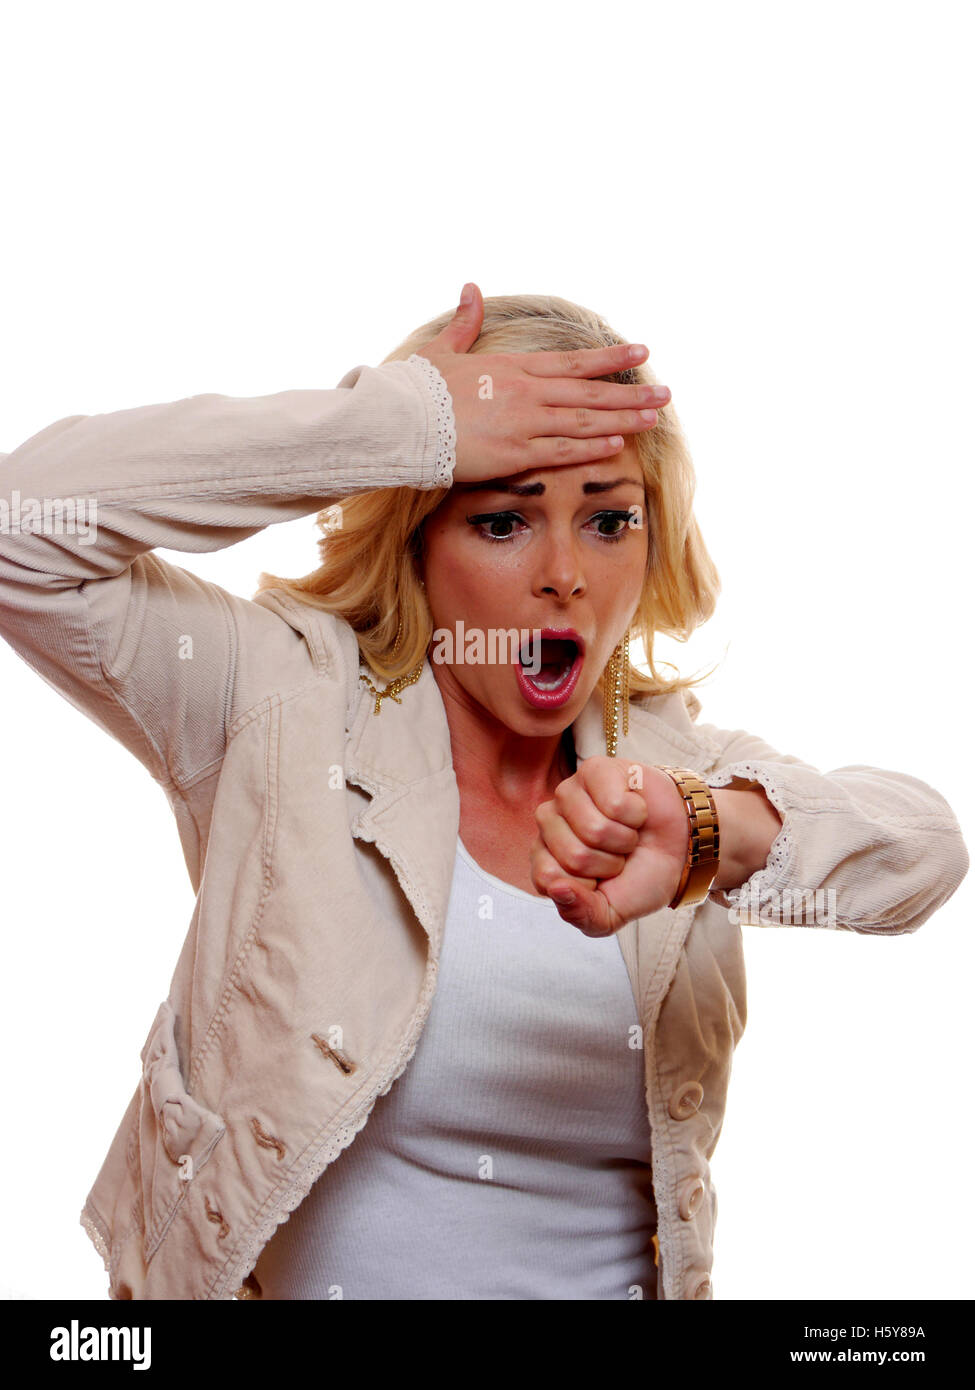 A woman is shocked when she looks at her watch. Stock Photo